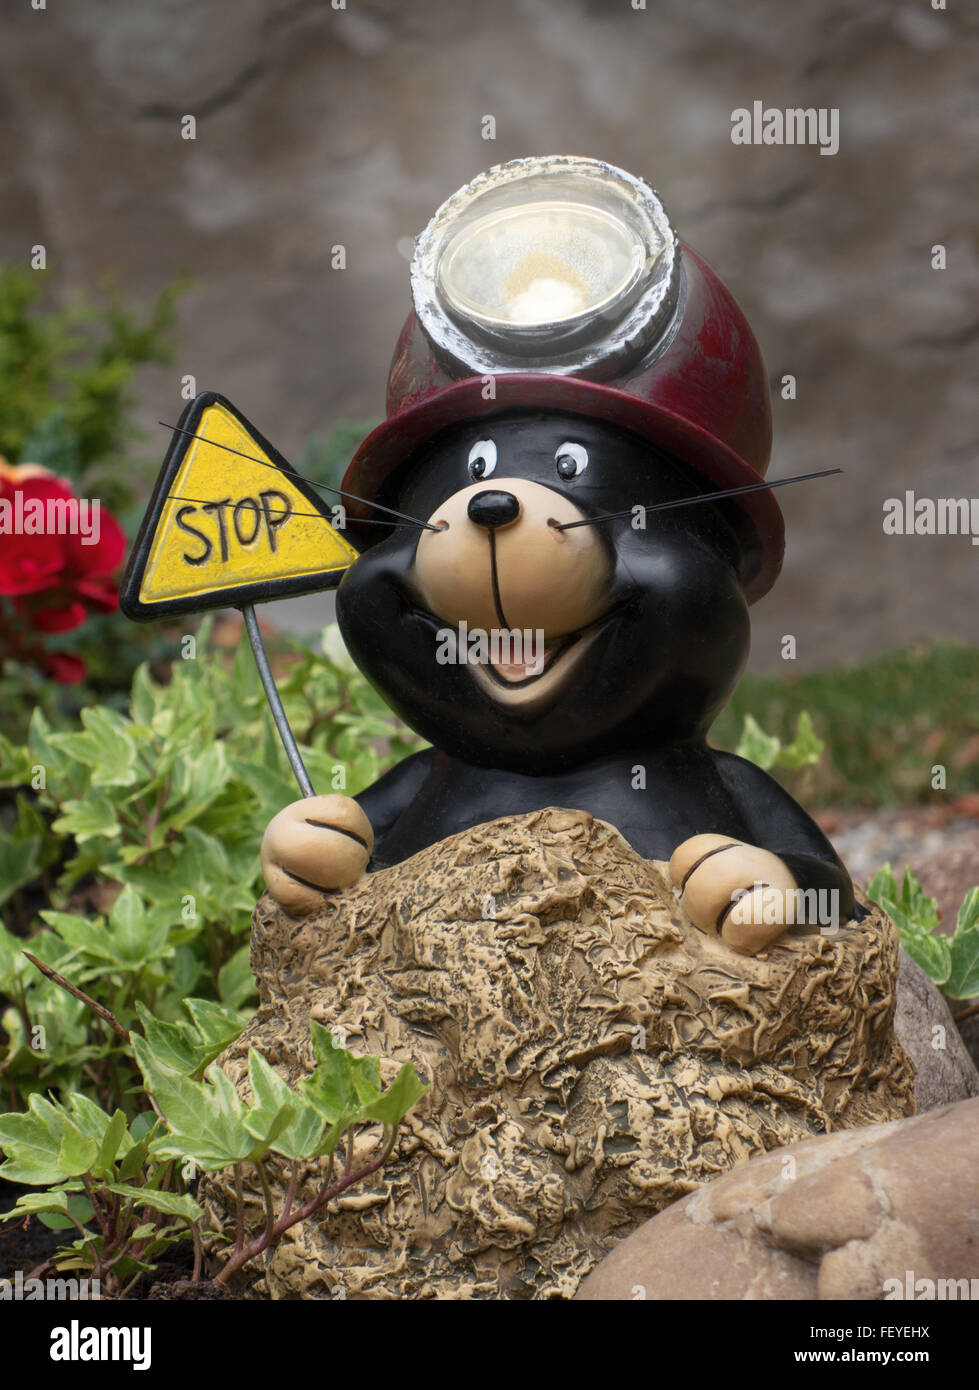 A funny, laughing mole figure with a helmet with miner's lamp and a sign STOP Stock Photo